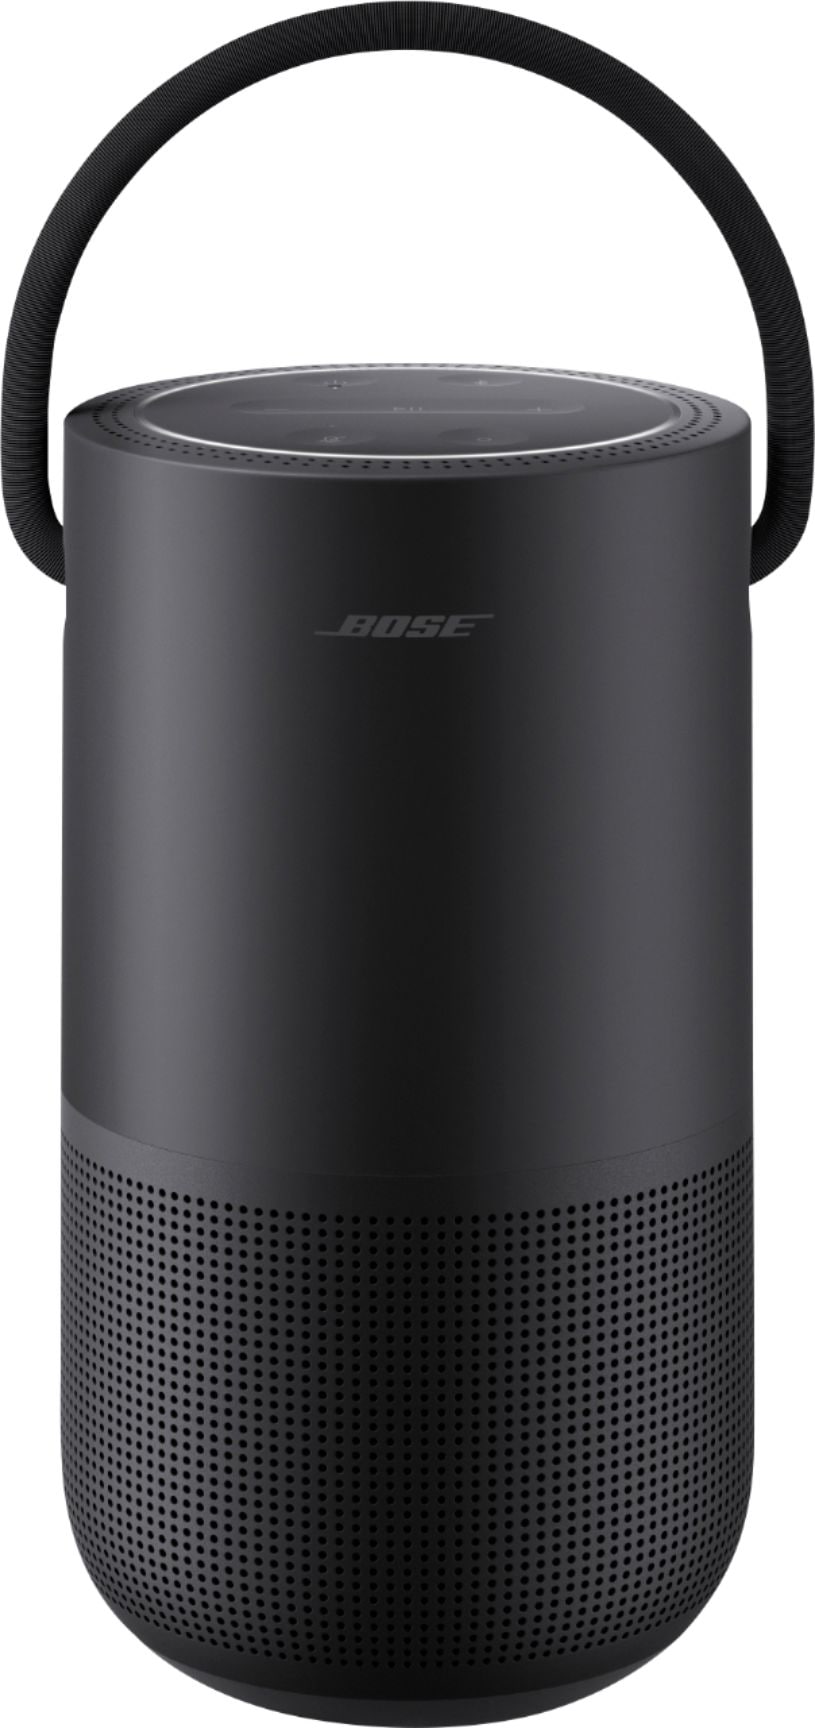 Bose - Portable Smart Speaker with built-in WiFi, Bluetooth, Google Assistant and Alexa Voice Control - Triple Black_0